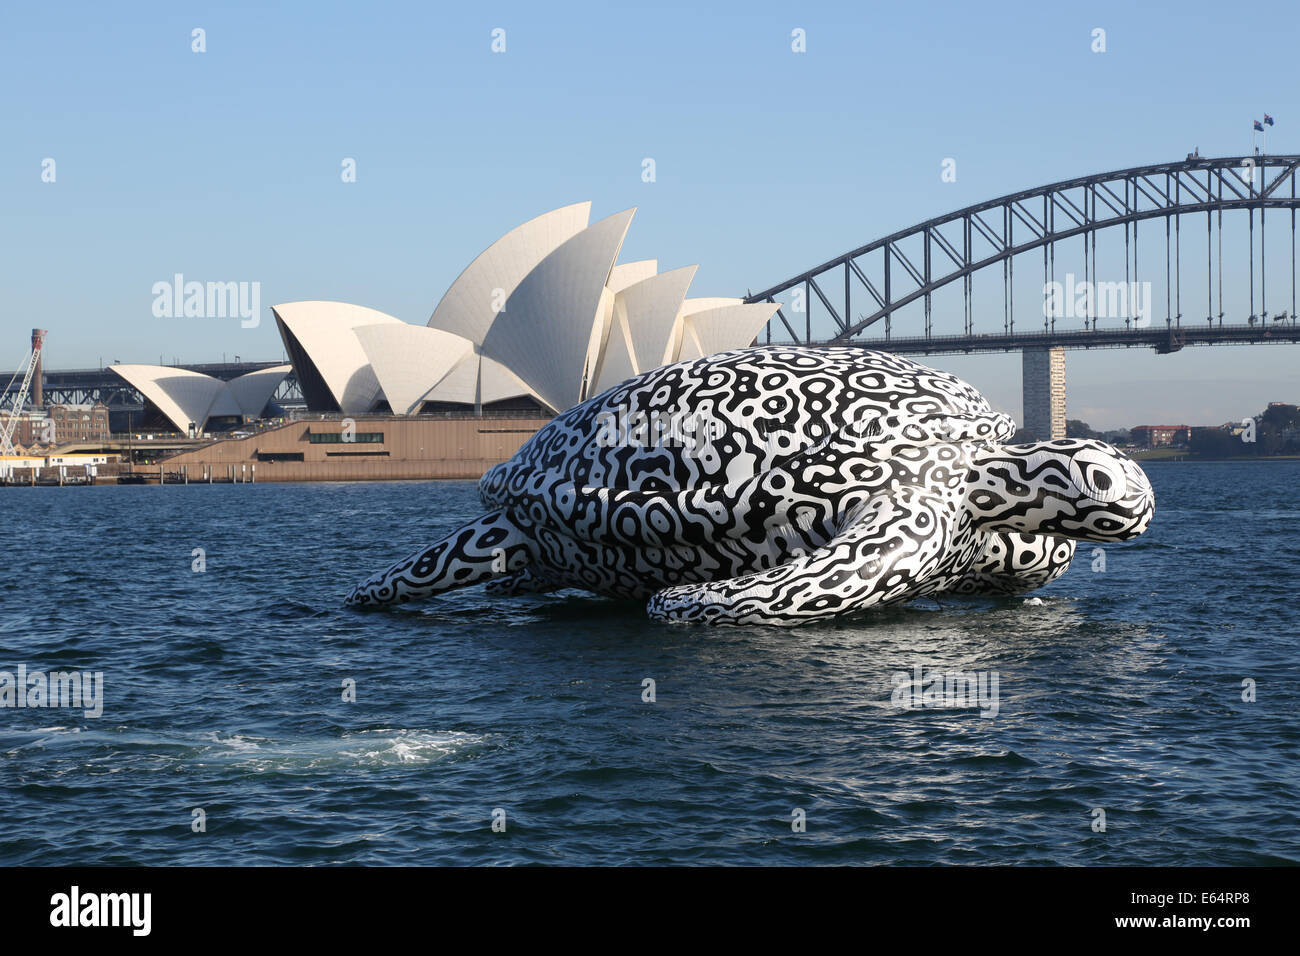 Sydney, NSW 2000, Australia. 15 August 2014. To celebrate the opening of World's first Undersea Art Exhibition at Sydney Aquarium a giant 15m floating sea turtle sculpture appeared on Sydney Harbour – viewed from near Mrs Macquarie's Chair. Copyright Credit:  2014 Richard Milnes/Alamy Live News. Stock Photo